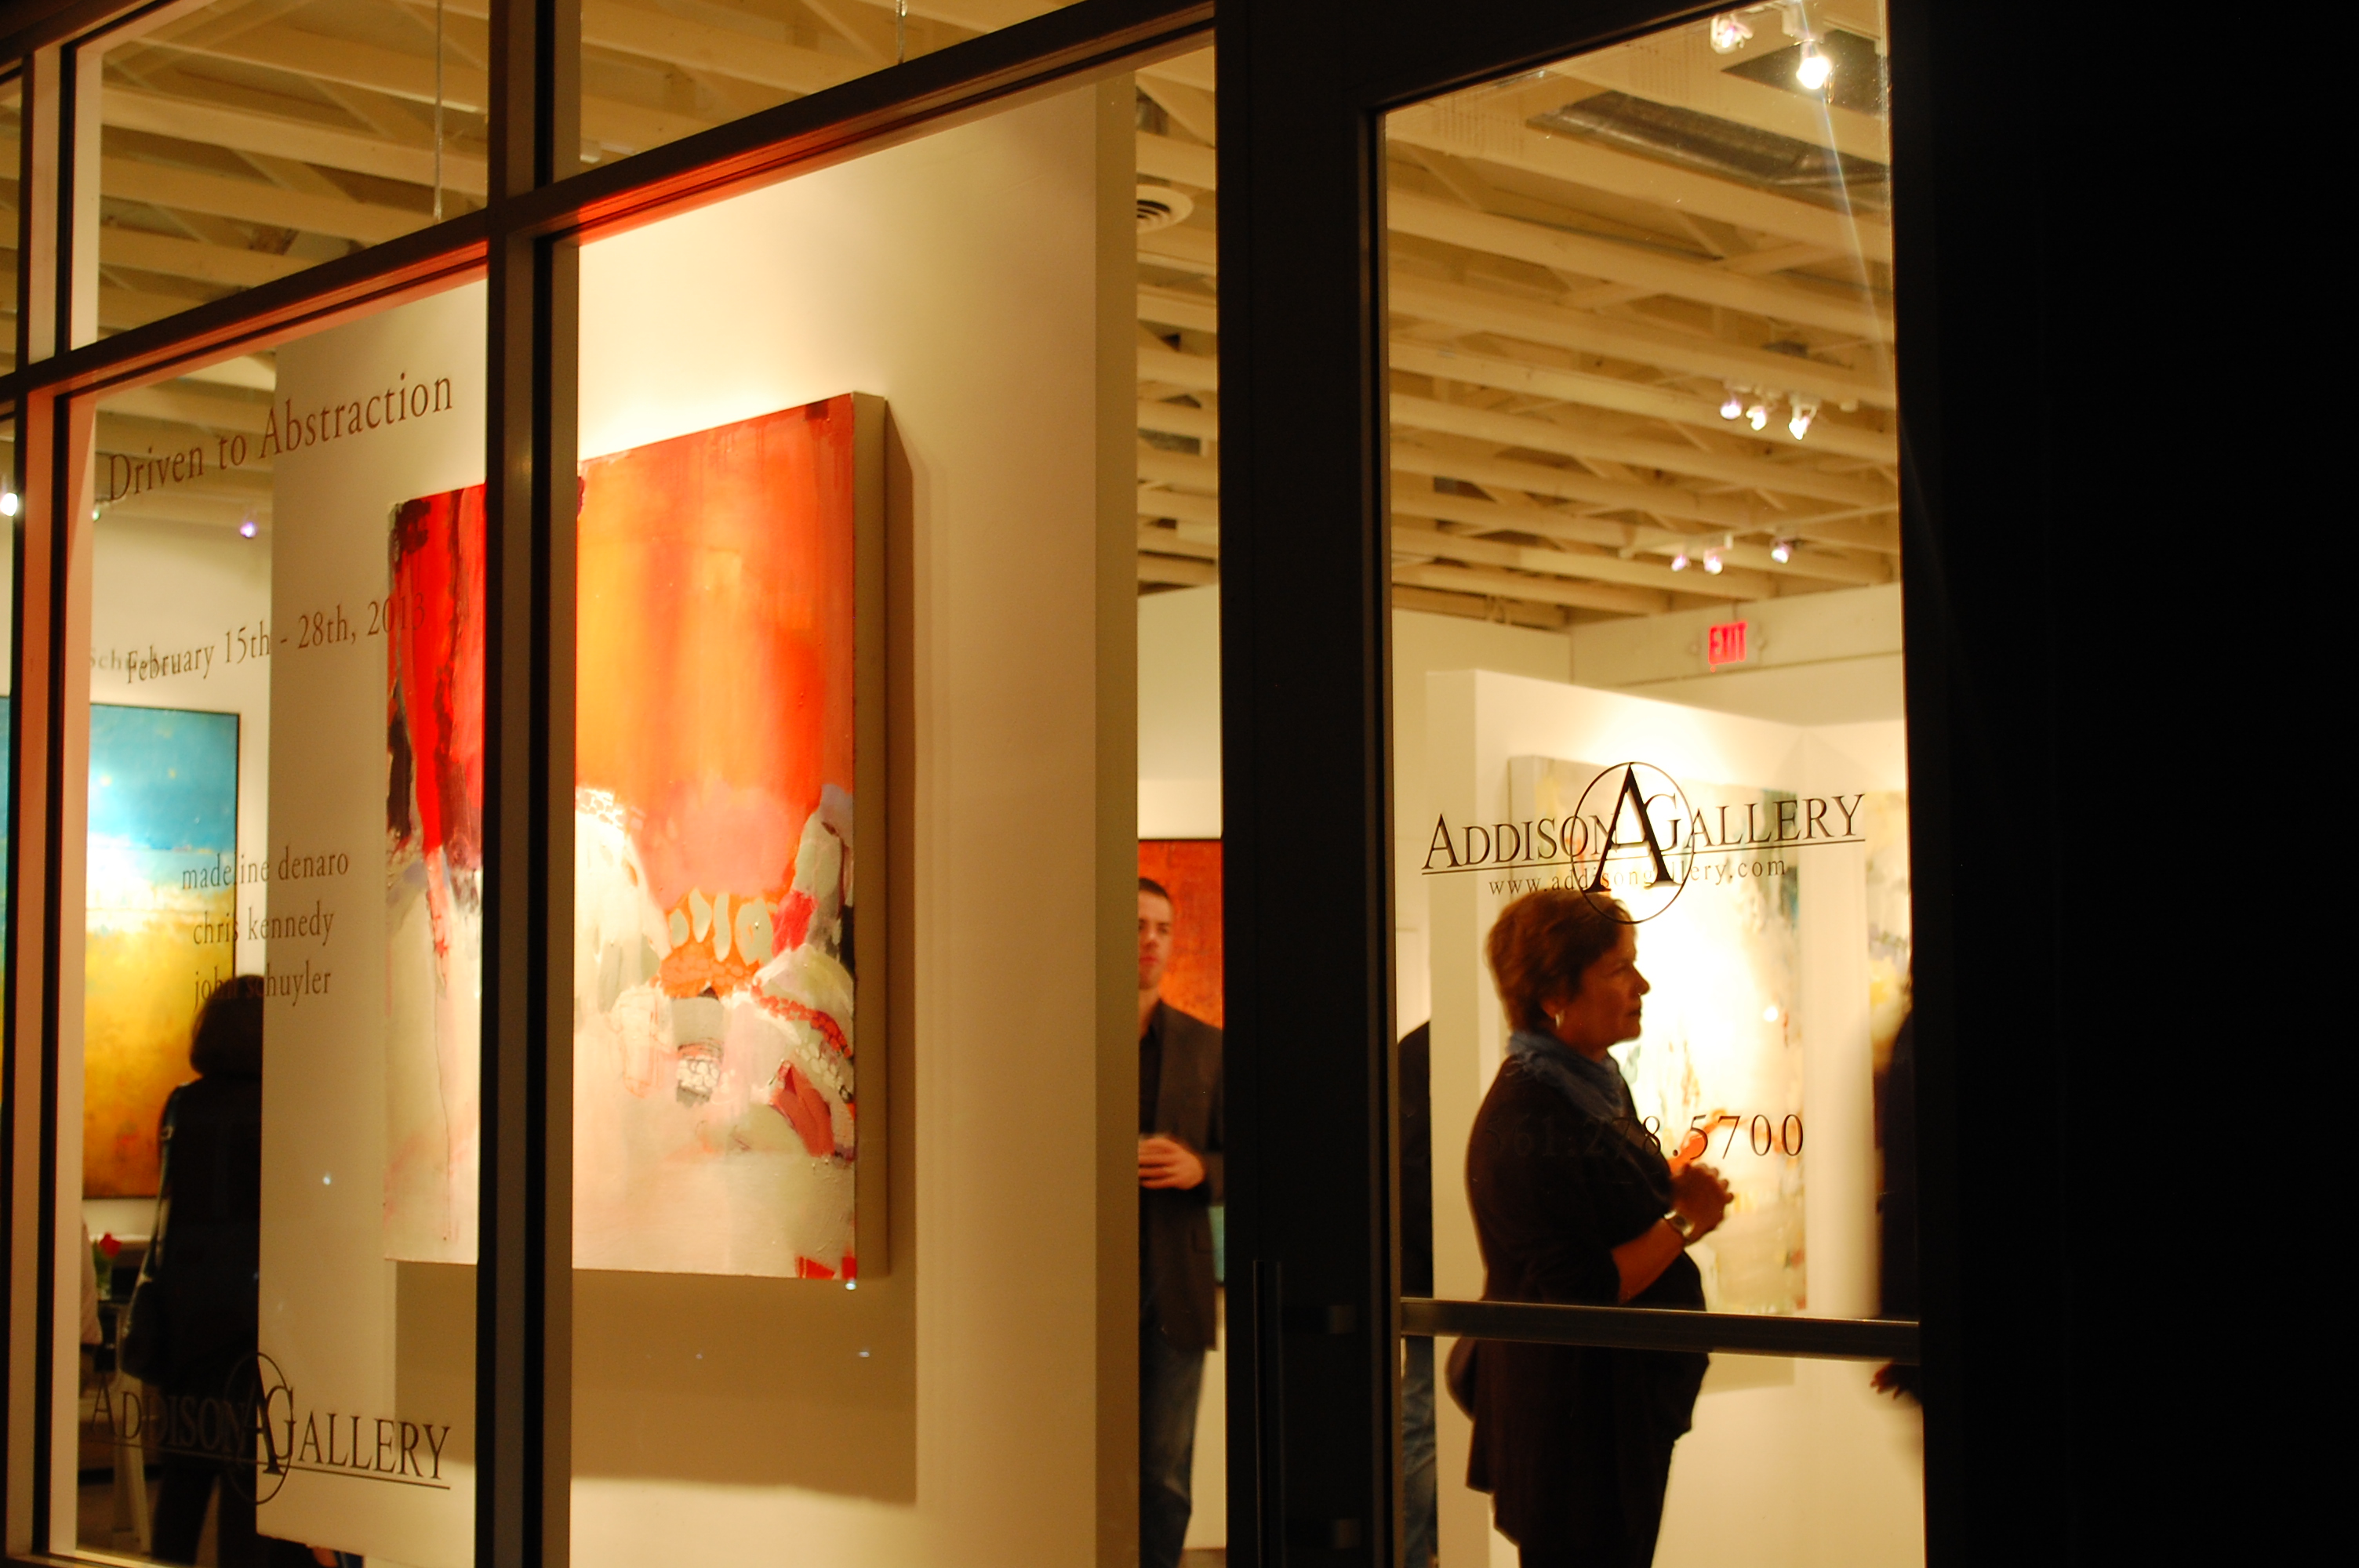 The Addison Gallery